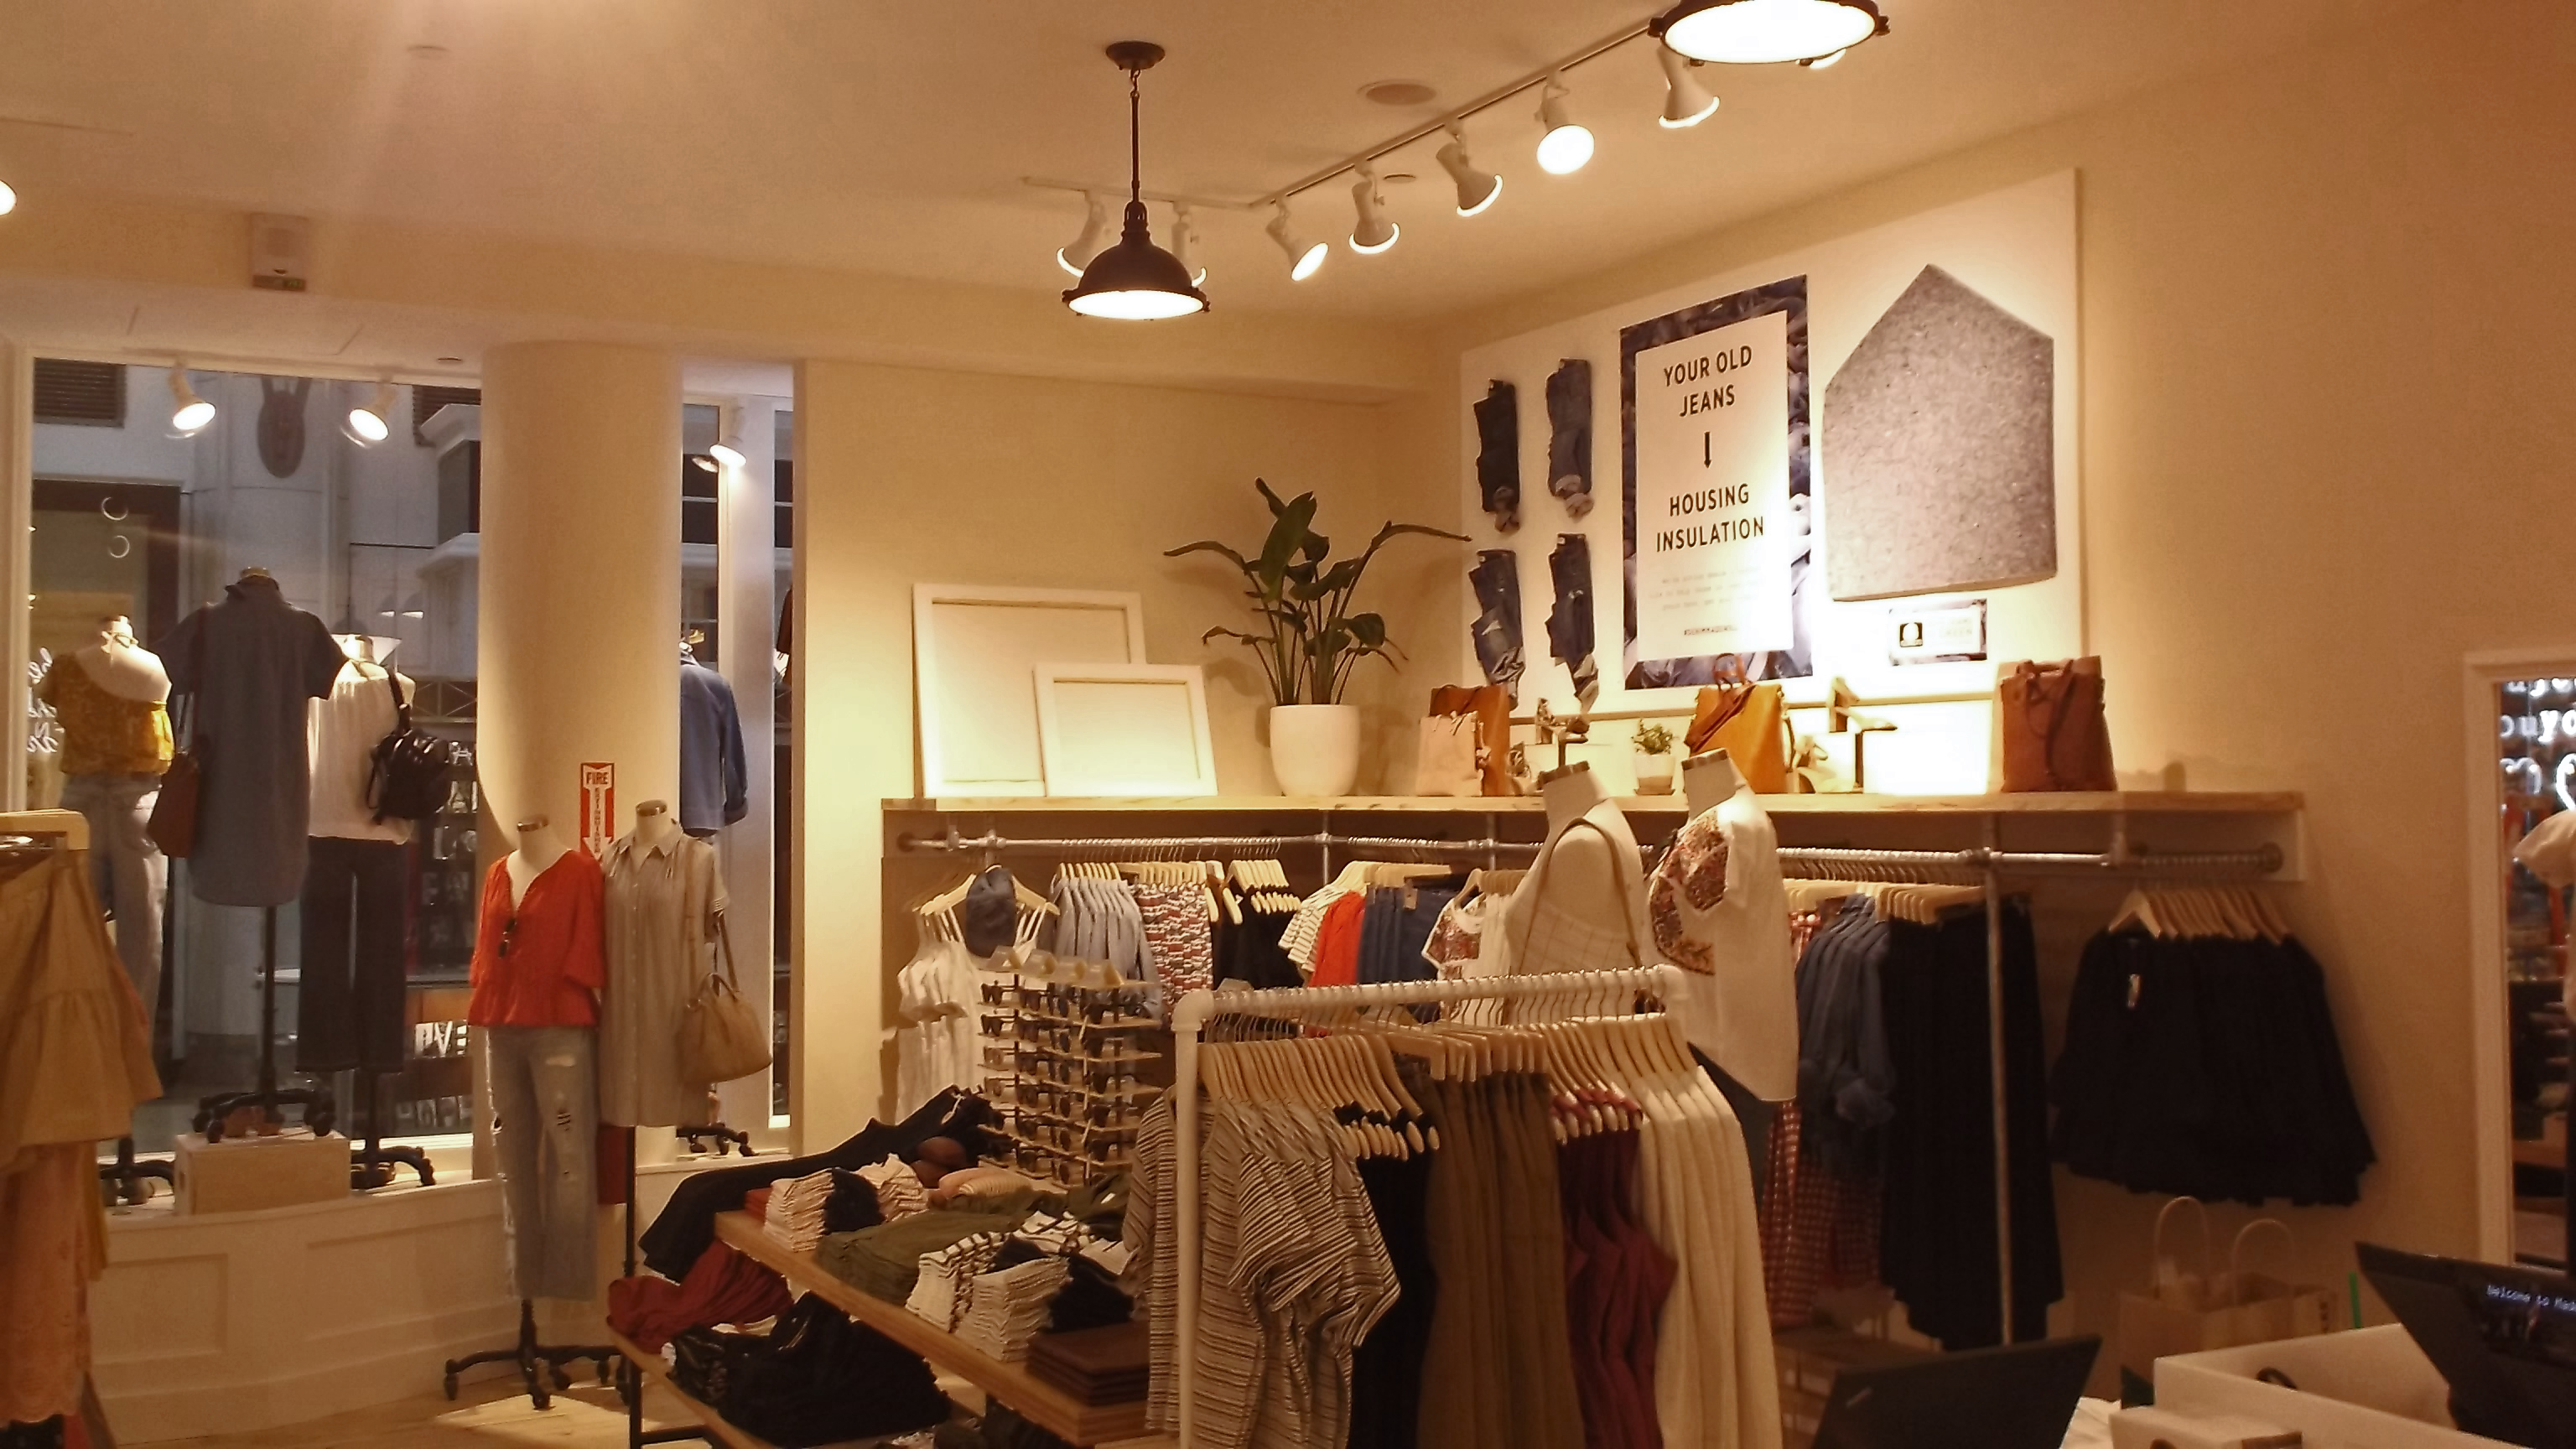 Picture of a Madewell store constructed by Retail Construction Services, Inc.